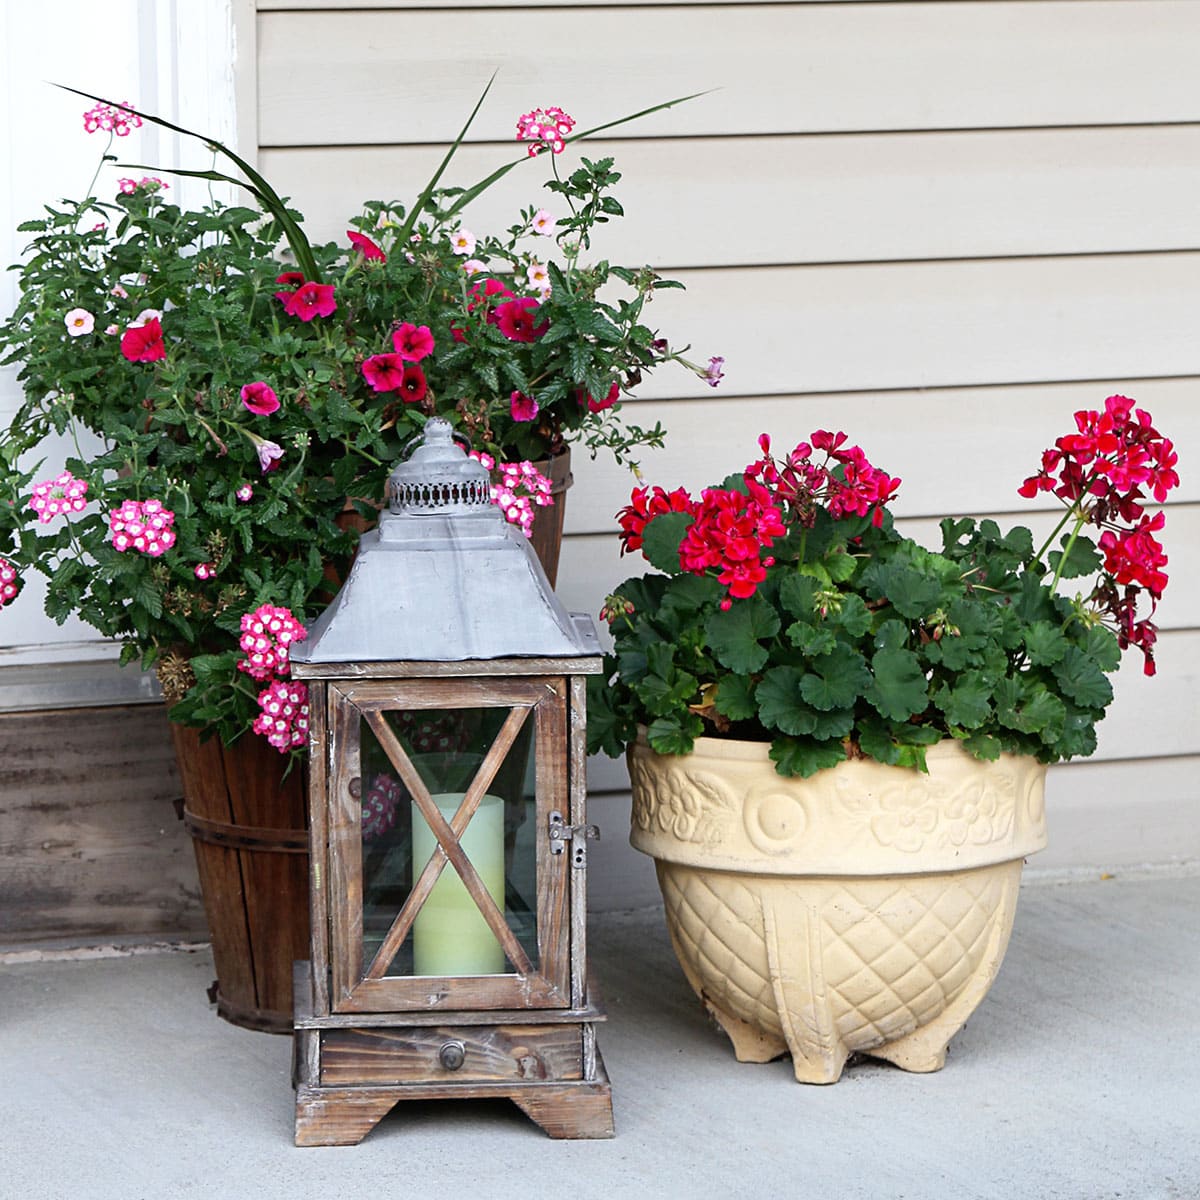 Vintage stoneware planter with red geraniums planted in it. Setting next to a bushel basket of flowers and a wooden farmhouse lantern.